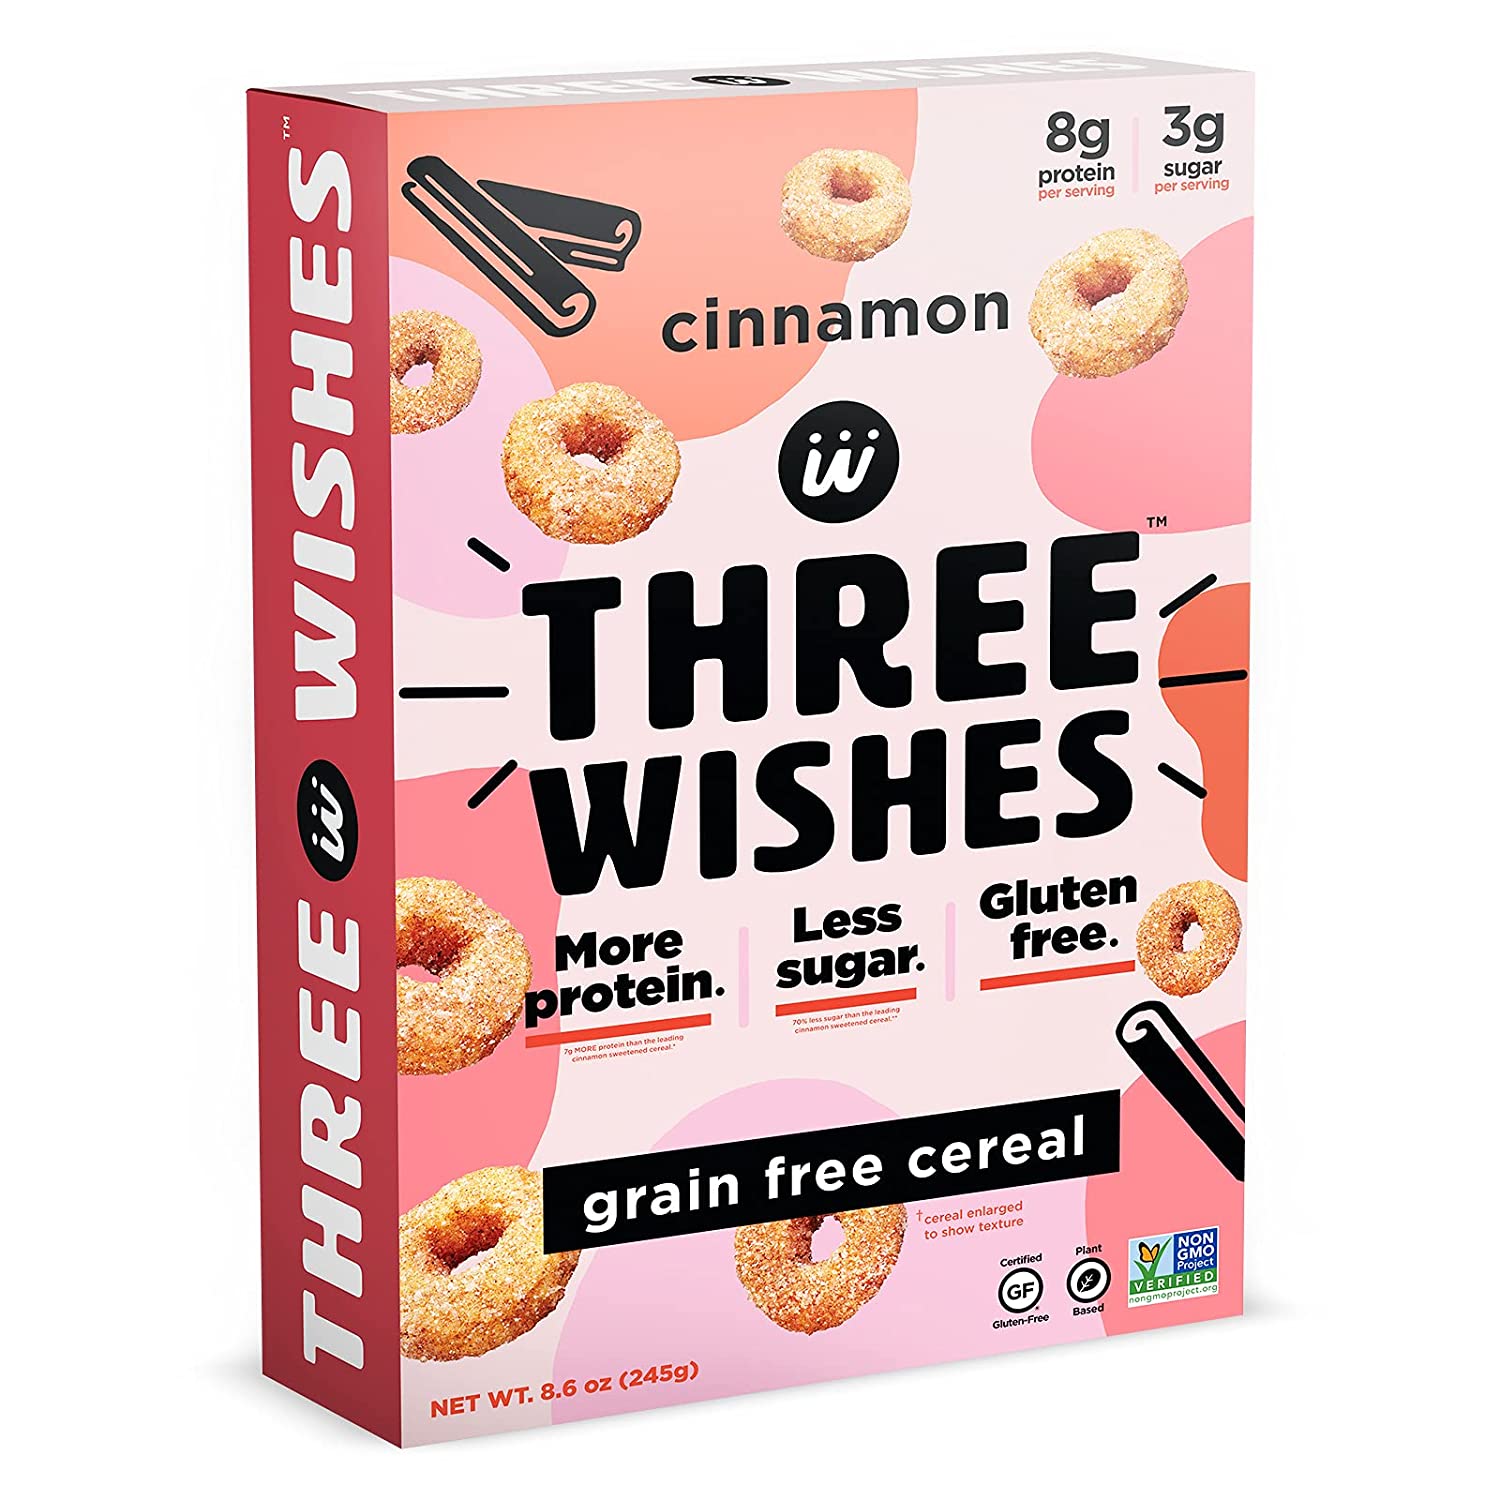 Plant-Based and Vegan Breakfast Cereal by Three Wishes - Cinnamon, 1 Pack - High Protein and Low Sugar Snack - Gluten-Free, Grain-Free, and Dairy-Free - Non-GMO